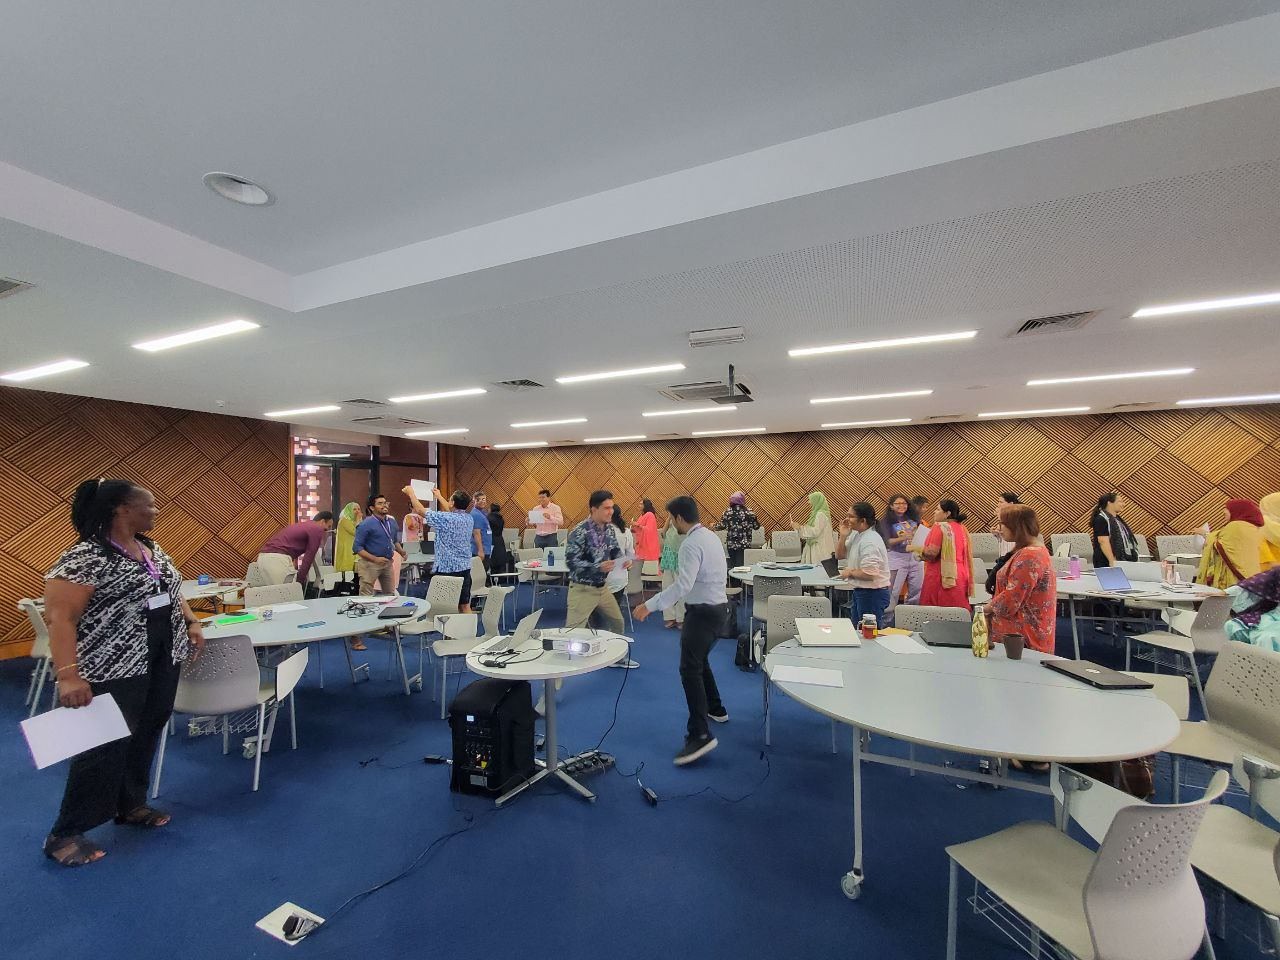 Teachers taking part in the ice-breaking session